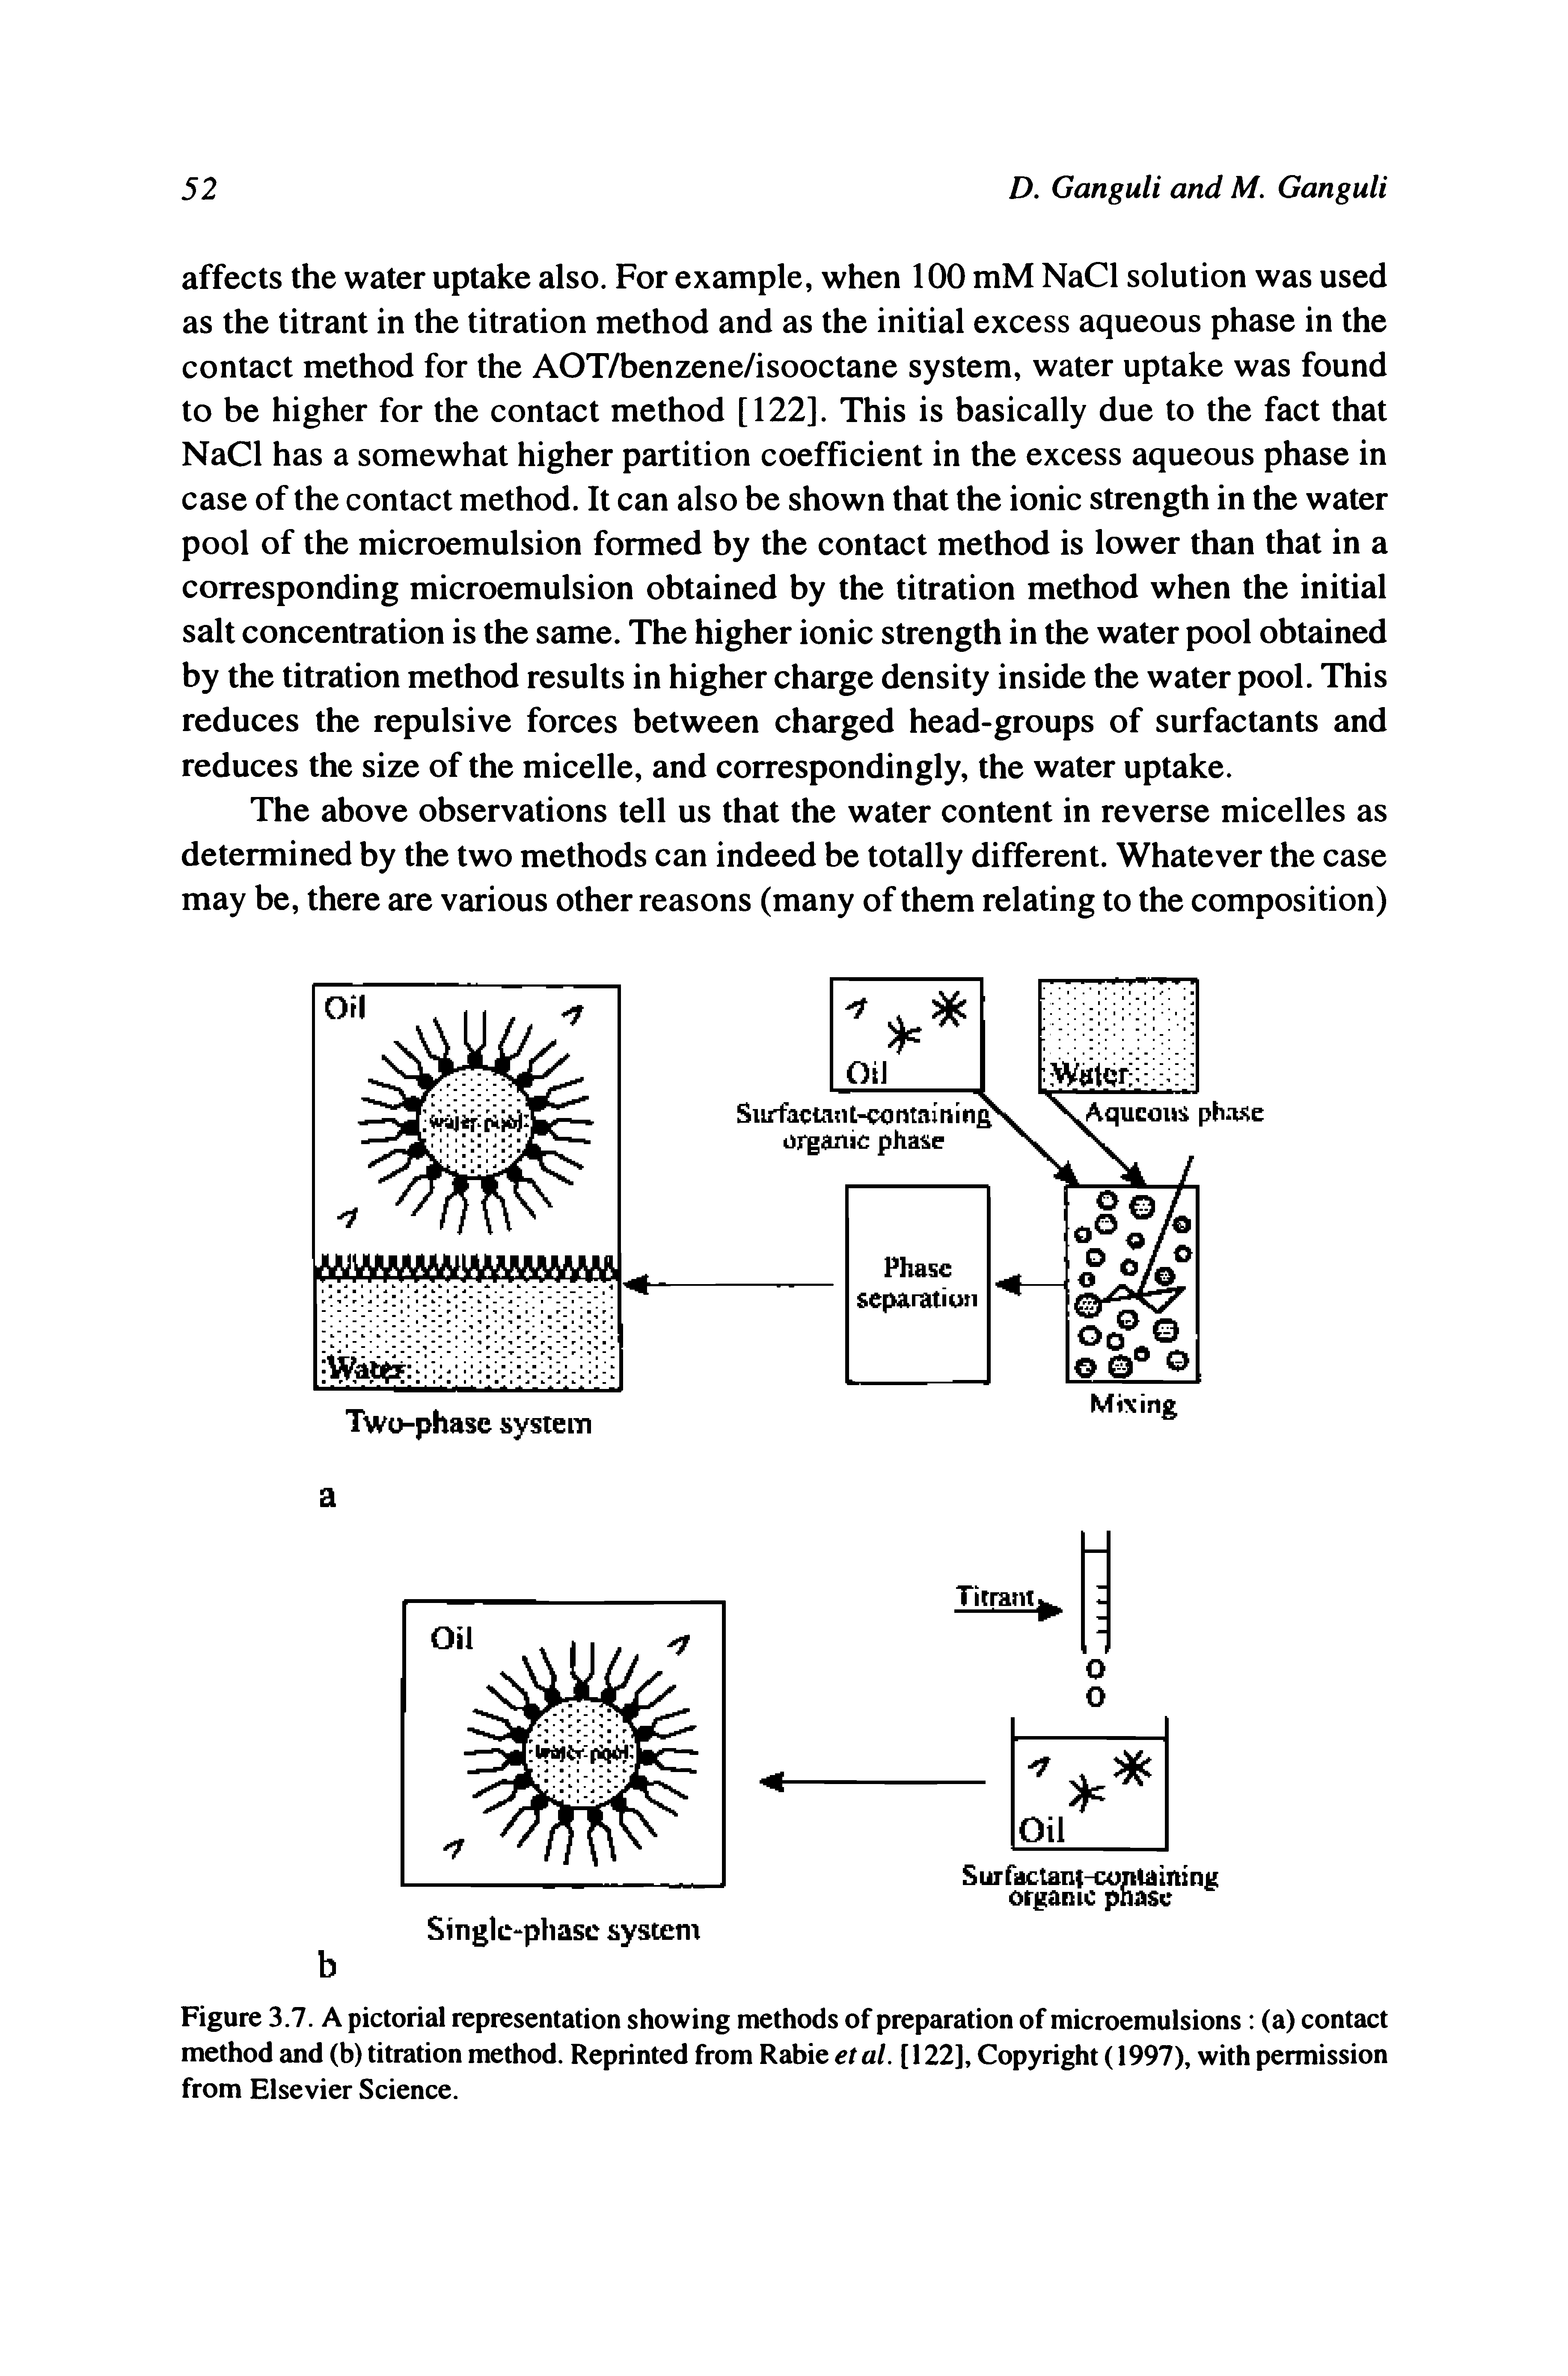 Figure 3.7. A pictorial representation showing methods of preparation of microemulsions (a) contact method and (b) titration method. Reprinted from Rabie et al. [ 122], Copyright (1997), with permission from Elsevier Science.